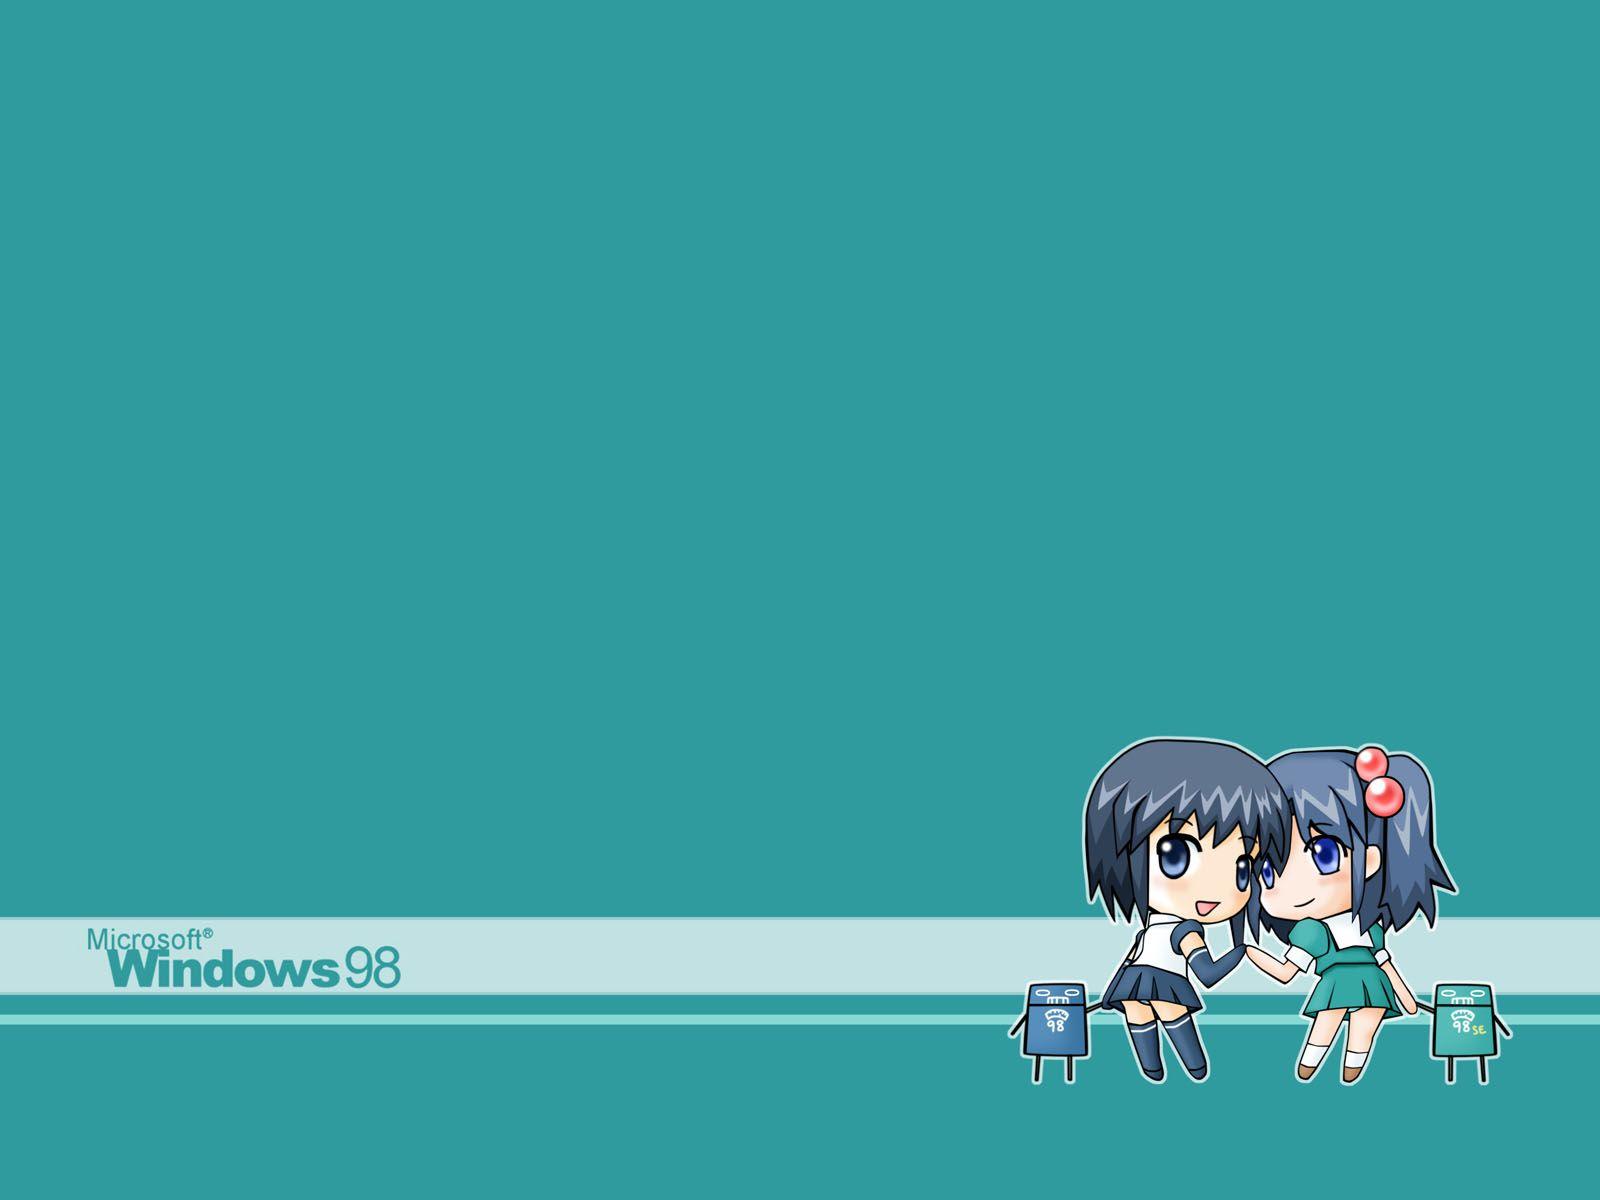 Windows 98 Wallpaper and Background Imagex1200